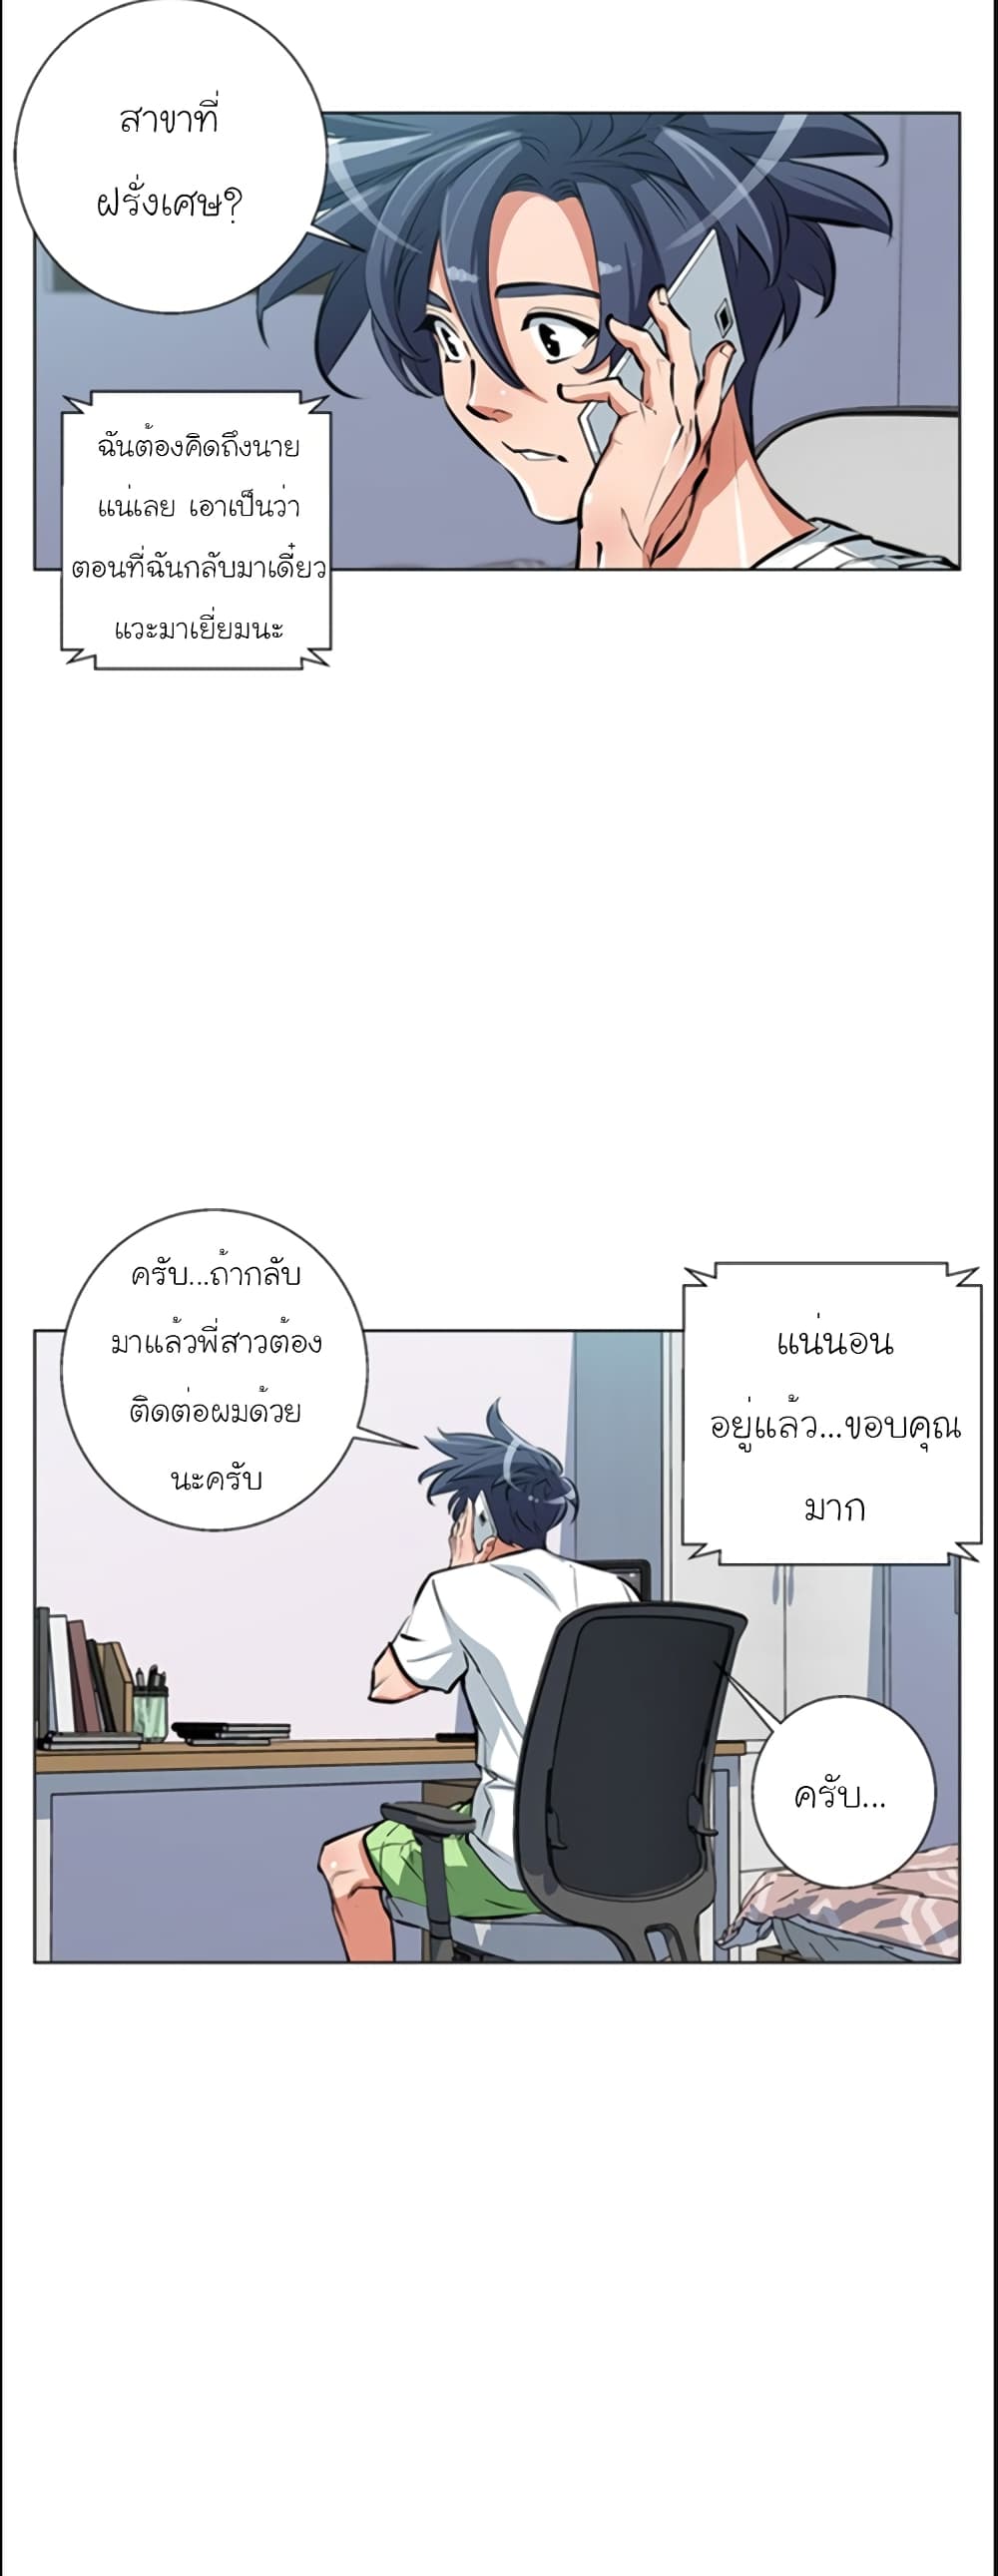 I Stack Experience Through Reading Books ตอนที่ 55 (6)